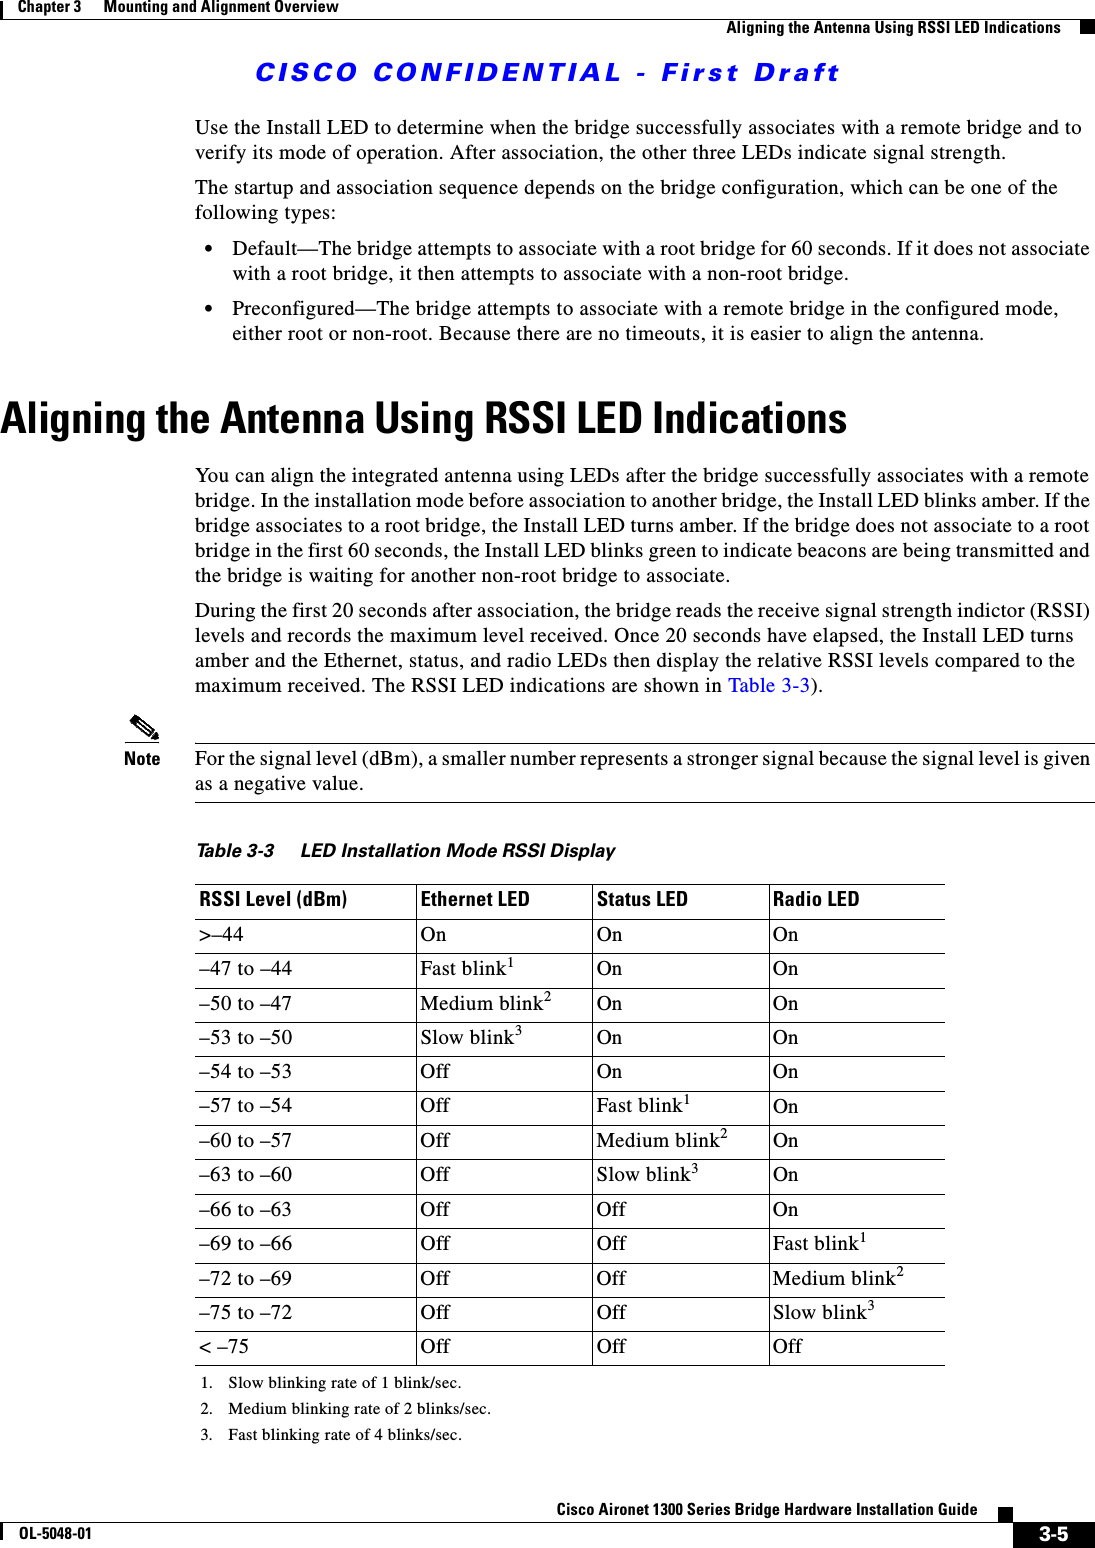 CISCO CONFIDENTIAL - First Draft3-5Cisco Aironet 1300 Series Bridge Hardware Installation GuideOL-5048-01Chapter 3      Mounting and Alignment OverviewAligning the Antenna Using RSSI LED IndicationsUse the Install LED to determine when the bridge successfully associates with a remote bridge and to verify its mode of operation. After association, the other three LEDs indicate signal strength.The startup and association sequence depends on the bridge configuration, which can be one of the following types:•Default—The bridge attempts to associate with a root bridge for 60 seconds. If it does not associate with a root bridge, it then attempts to associate with a non-root bridge. •Preconfigured—The bridge attempts to associate with a remote bridge in the configured mode, either root or non-root. Because there are no timeouts, it is easier to align the antenna.Aligning the Antenna Using RSSI LED IndicationsYou can align the integrated antenna using LEDs after the bridge successfully associates with a remote bridge. In the installation mode before association to another bridge, the Install LED blinks amber. If the bridge associates to a root bridge, the Install LED turns amber. If the bridge does not associate to a root bridge in the first 60 seconds, the Install LED blinks green to indicate beacons are being transmitted and the bridge is waiting for another non-root bridge to associate. During the first 20 seconds after association, the bridge reads the receive signal strength indictor (RSSI) levels and records the maximum level received. Once 20 seconds have elapsed, the Install LED turns amber and the Ethernet, status, and radio LEDs then display the relative RSSI levels compared to the maximum received. The RSSI LED indications are shown in Table 3-3).Note For the signal level (dBm), a smaller number represents a stronger signal because the signal level is given as a negative value.Table 3-3 LED Installation Mode RSSI DisplayRSSI Level (dBm) Ethernet LED Status LED Radio LED&gt;–44 On On On–47 to –44 Fast blink11. Slow blinking rate of 1 blink/sec.On On–50 to –47 Medium blink22. Medium blinking rate of 2 blinks/sec.On On–53 to –50 Slow blink33. Fast blinking rate of 4 blinks/sec.On On–54 to –53 Off On On–57 to –54 Off Fast blink1On–60 to –57 Off Medium blink2On–63 to –60 Off Slow blink3On–66 to –63 Off Off On–69 to –66 Off Off Fast blink1–72 to –69 Off Off Medium blink2–75 to –72 Off Off Slow blink3&lt; –75 Off Off Off